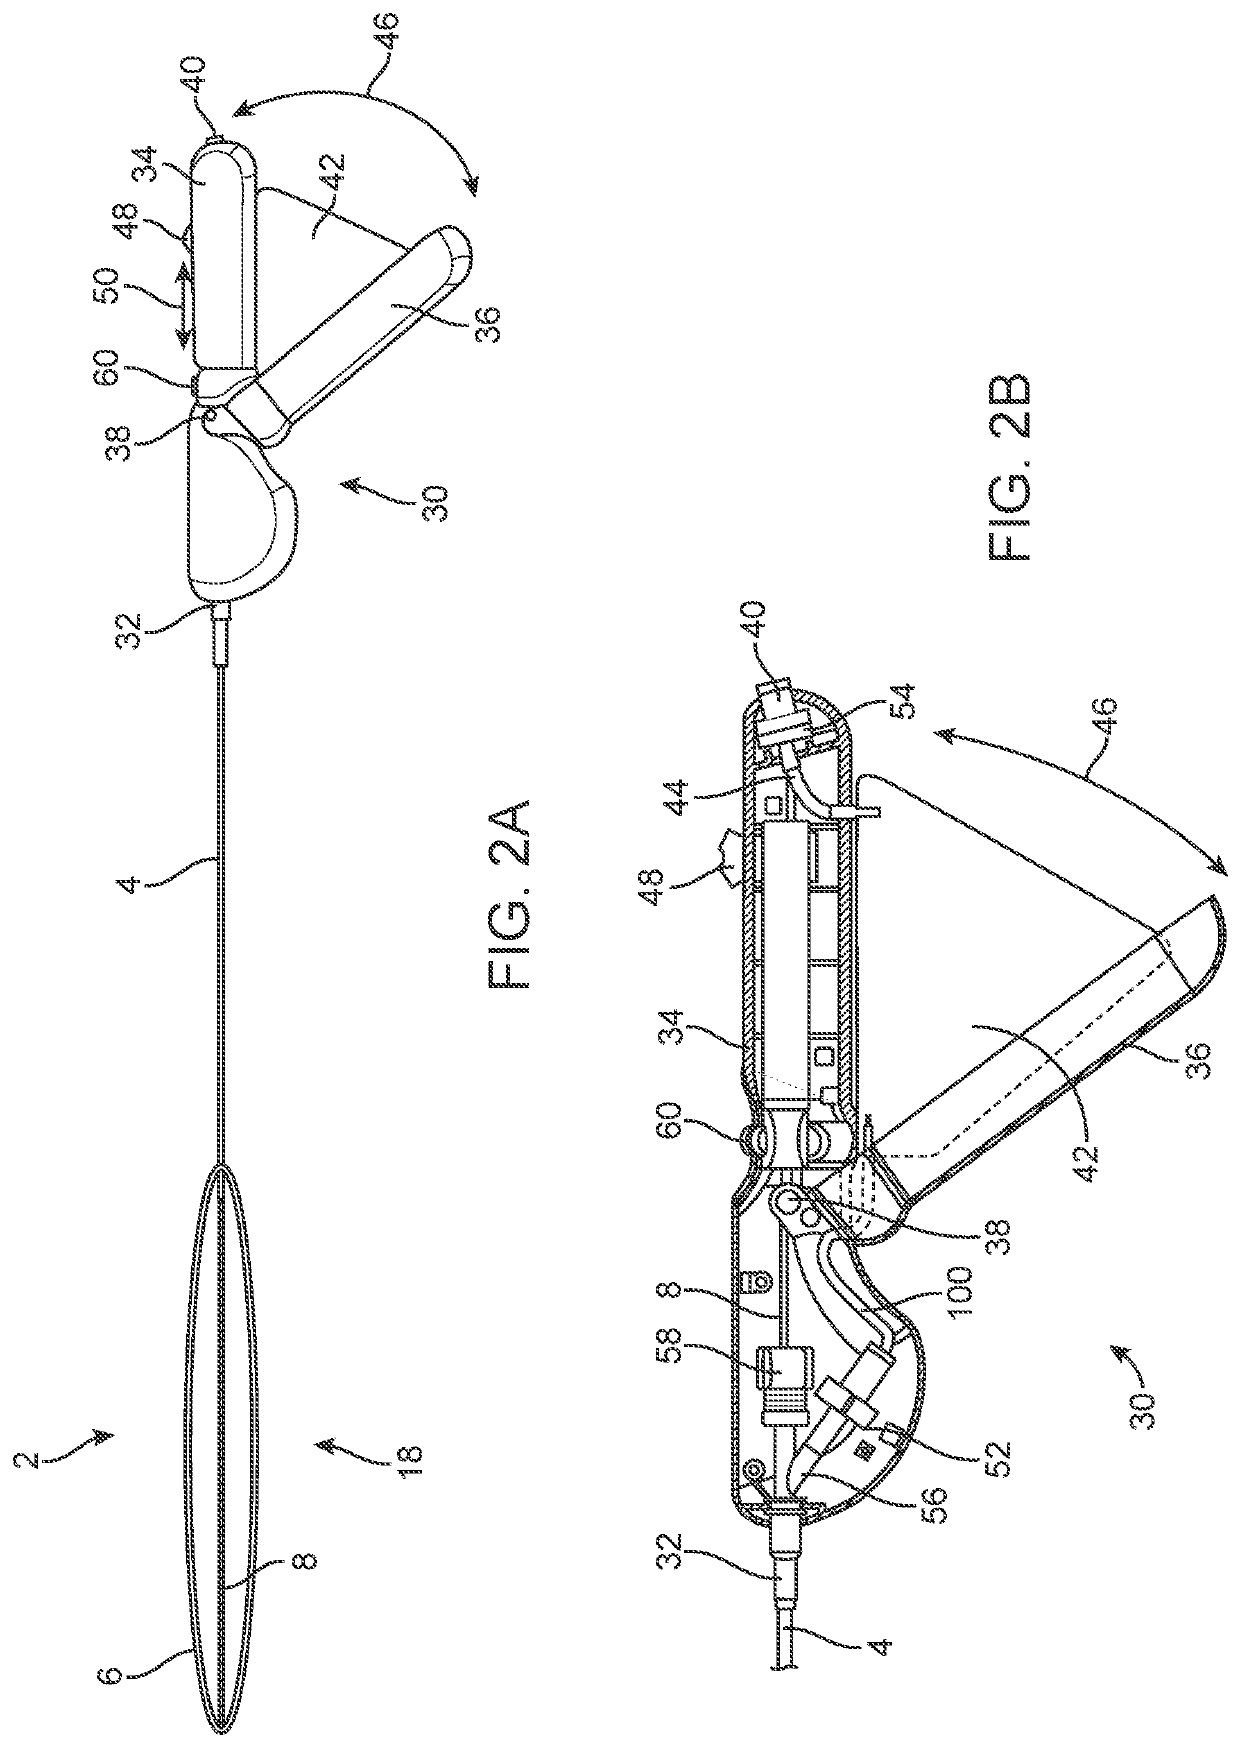 Apparatus and method for everting catheter for iud delivery and placement in the uterine cavity